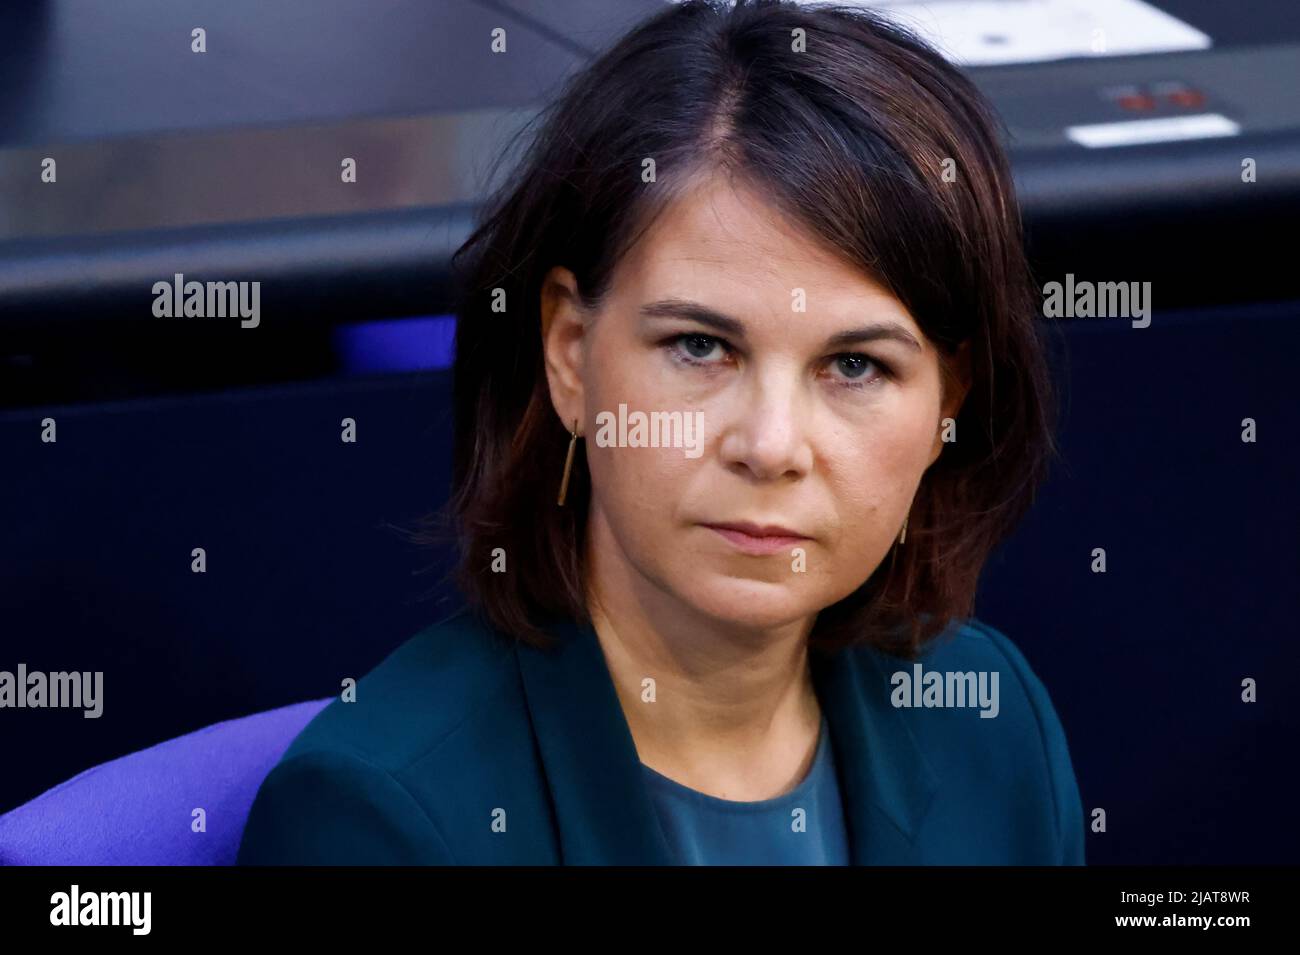 German Foreign Minister Annalena Baerbock attends a session of Germany's lower house of parliament, the Bundestag, in Berlin, Germany, June 1, 2022. REUTERS/Hannibal Hanschke Stock Photo